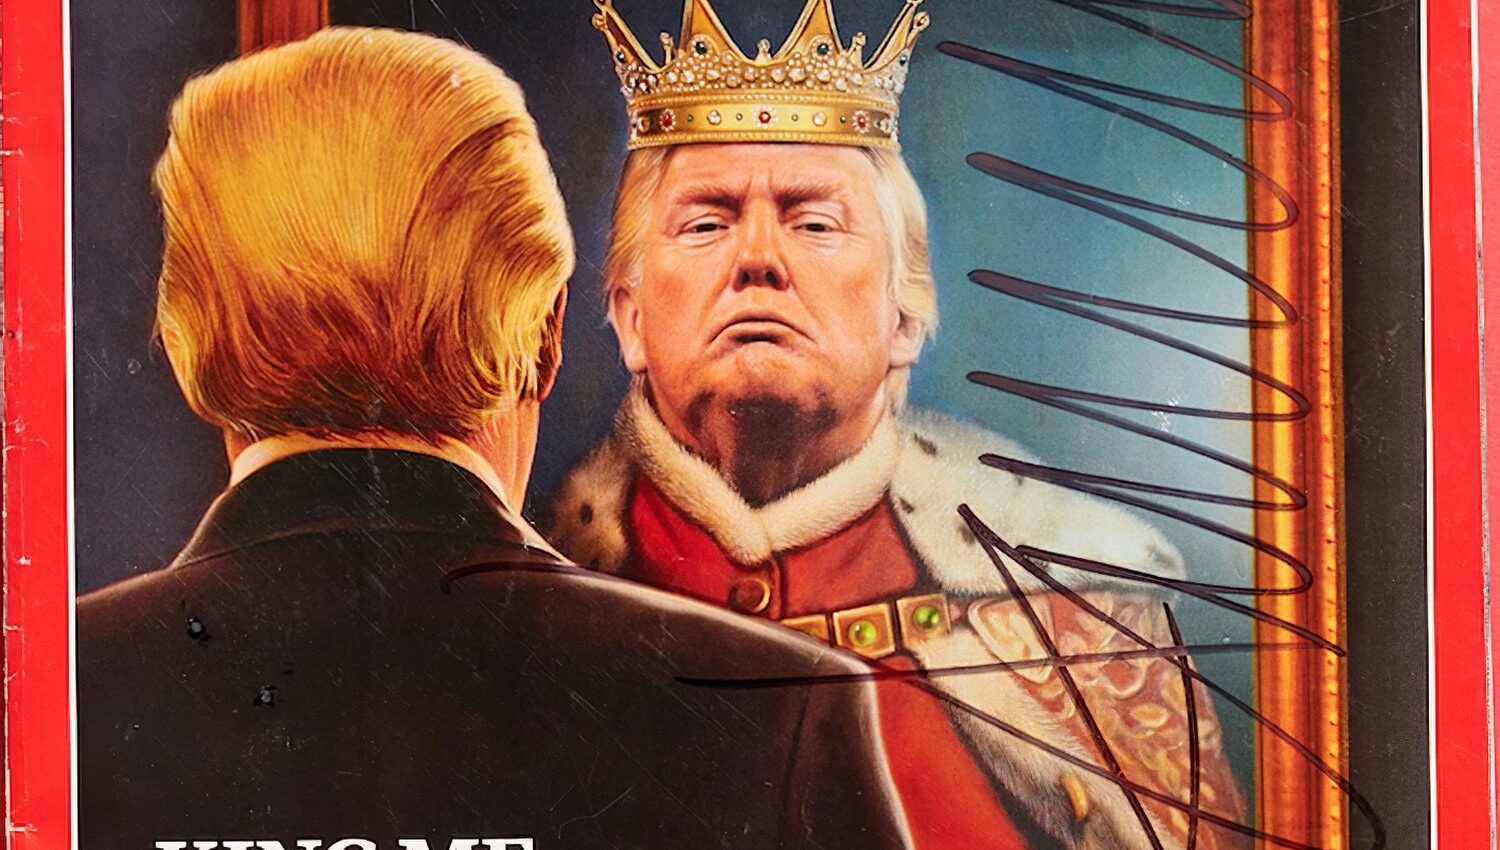 Andres Serrano, King Me (photograph of a Time Magazine cover autographed by Trump, from “The Game: All Things Trump,” 2018-2019)